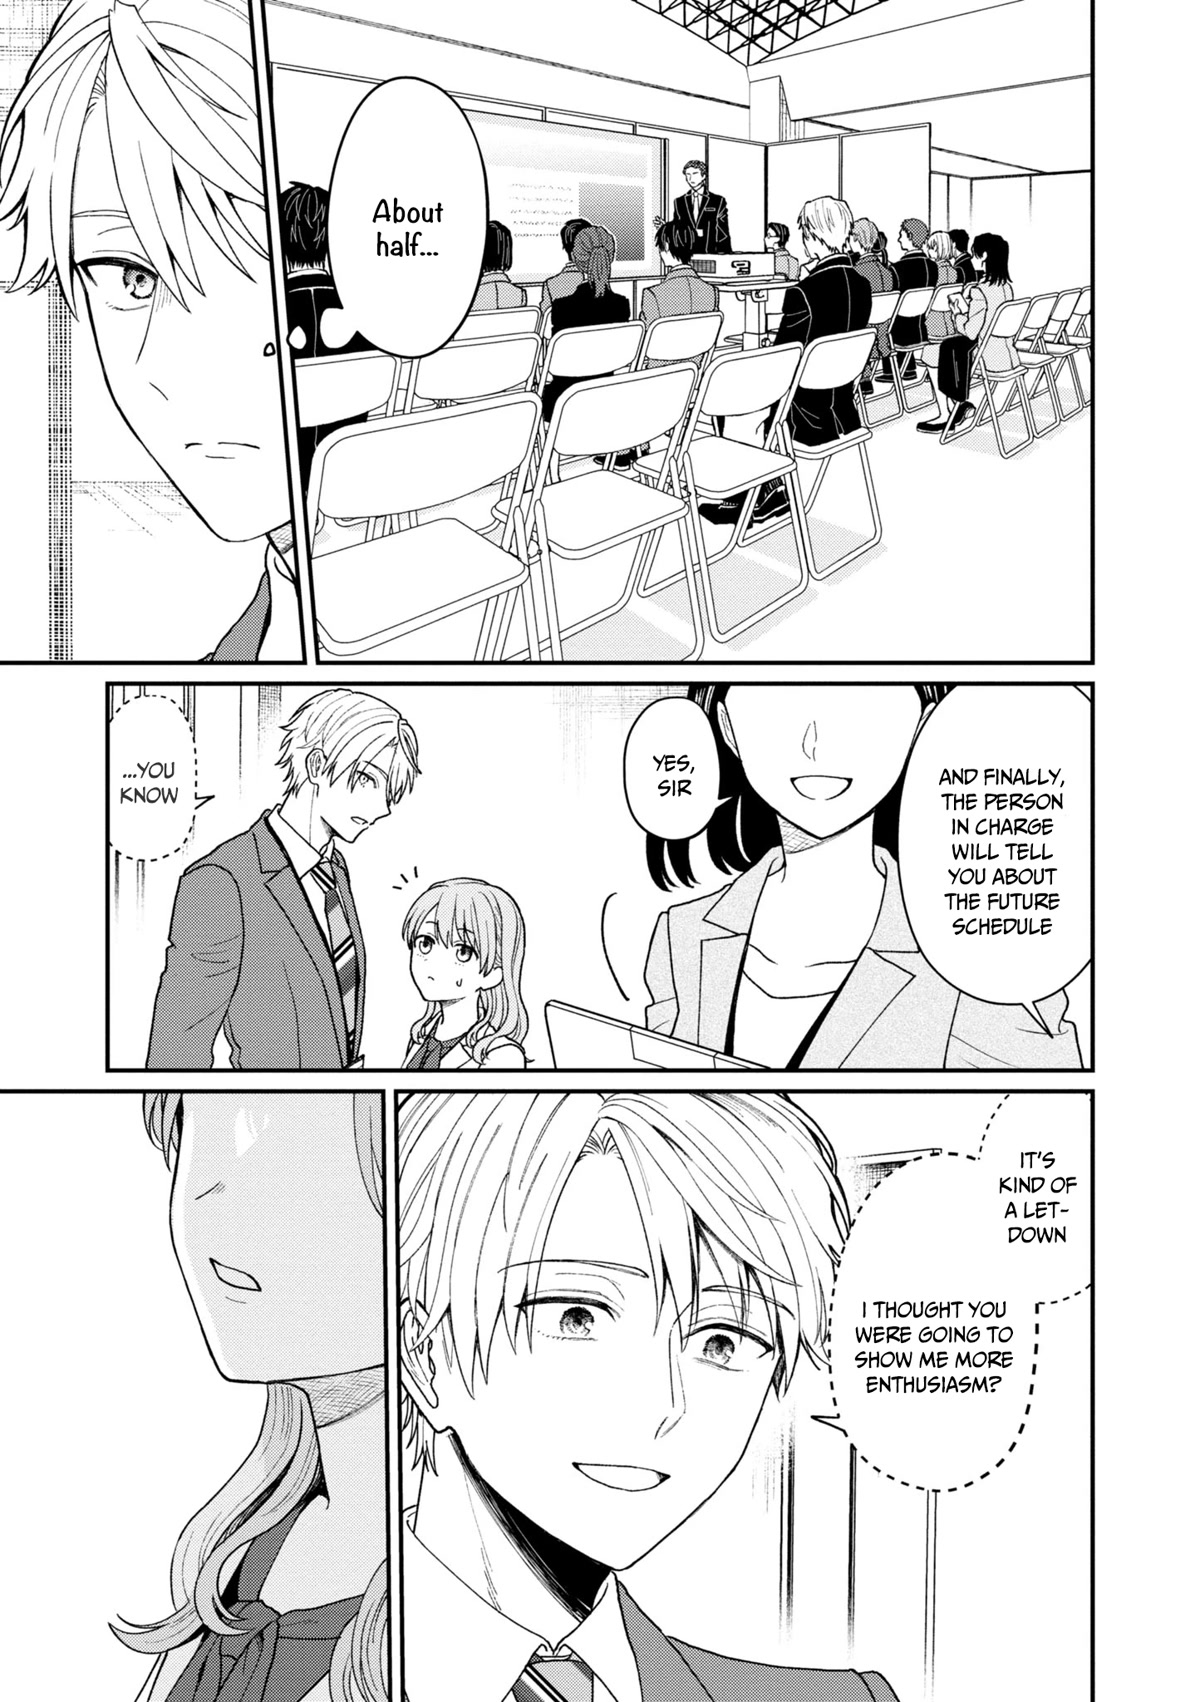 The New-Hire Who Could "Read" Emotions and the Unsociable Senpai - chapter 19 - #6